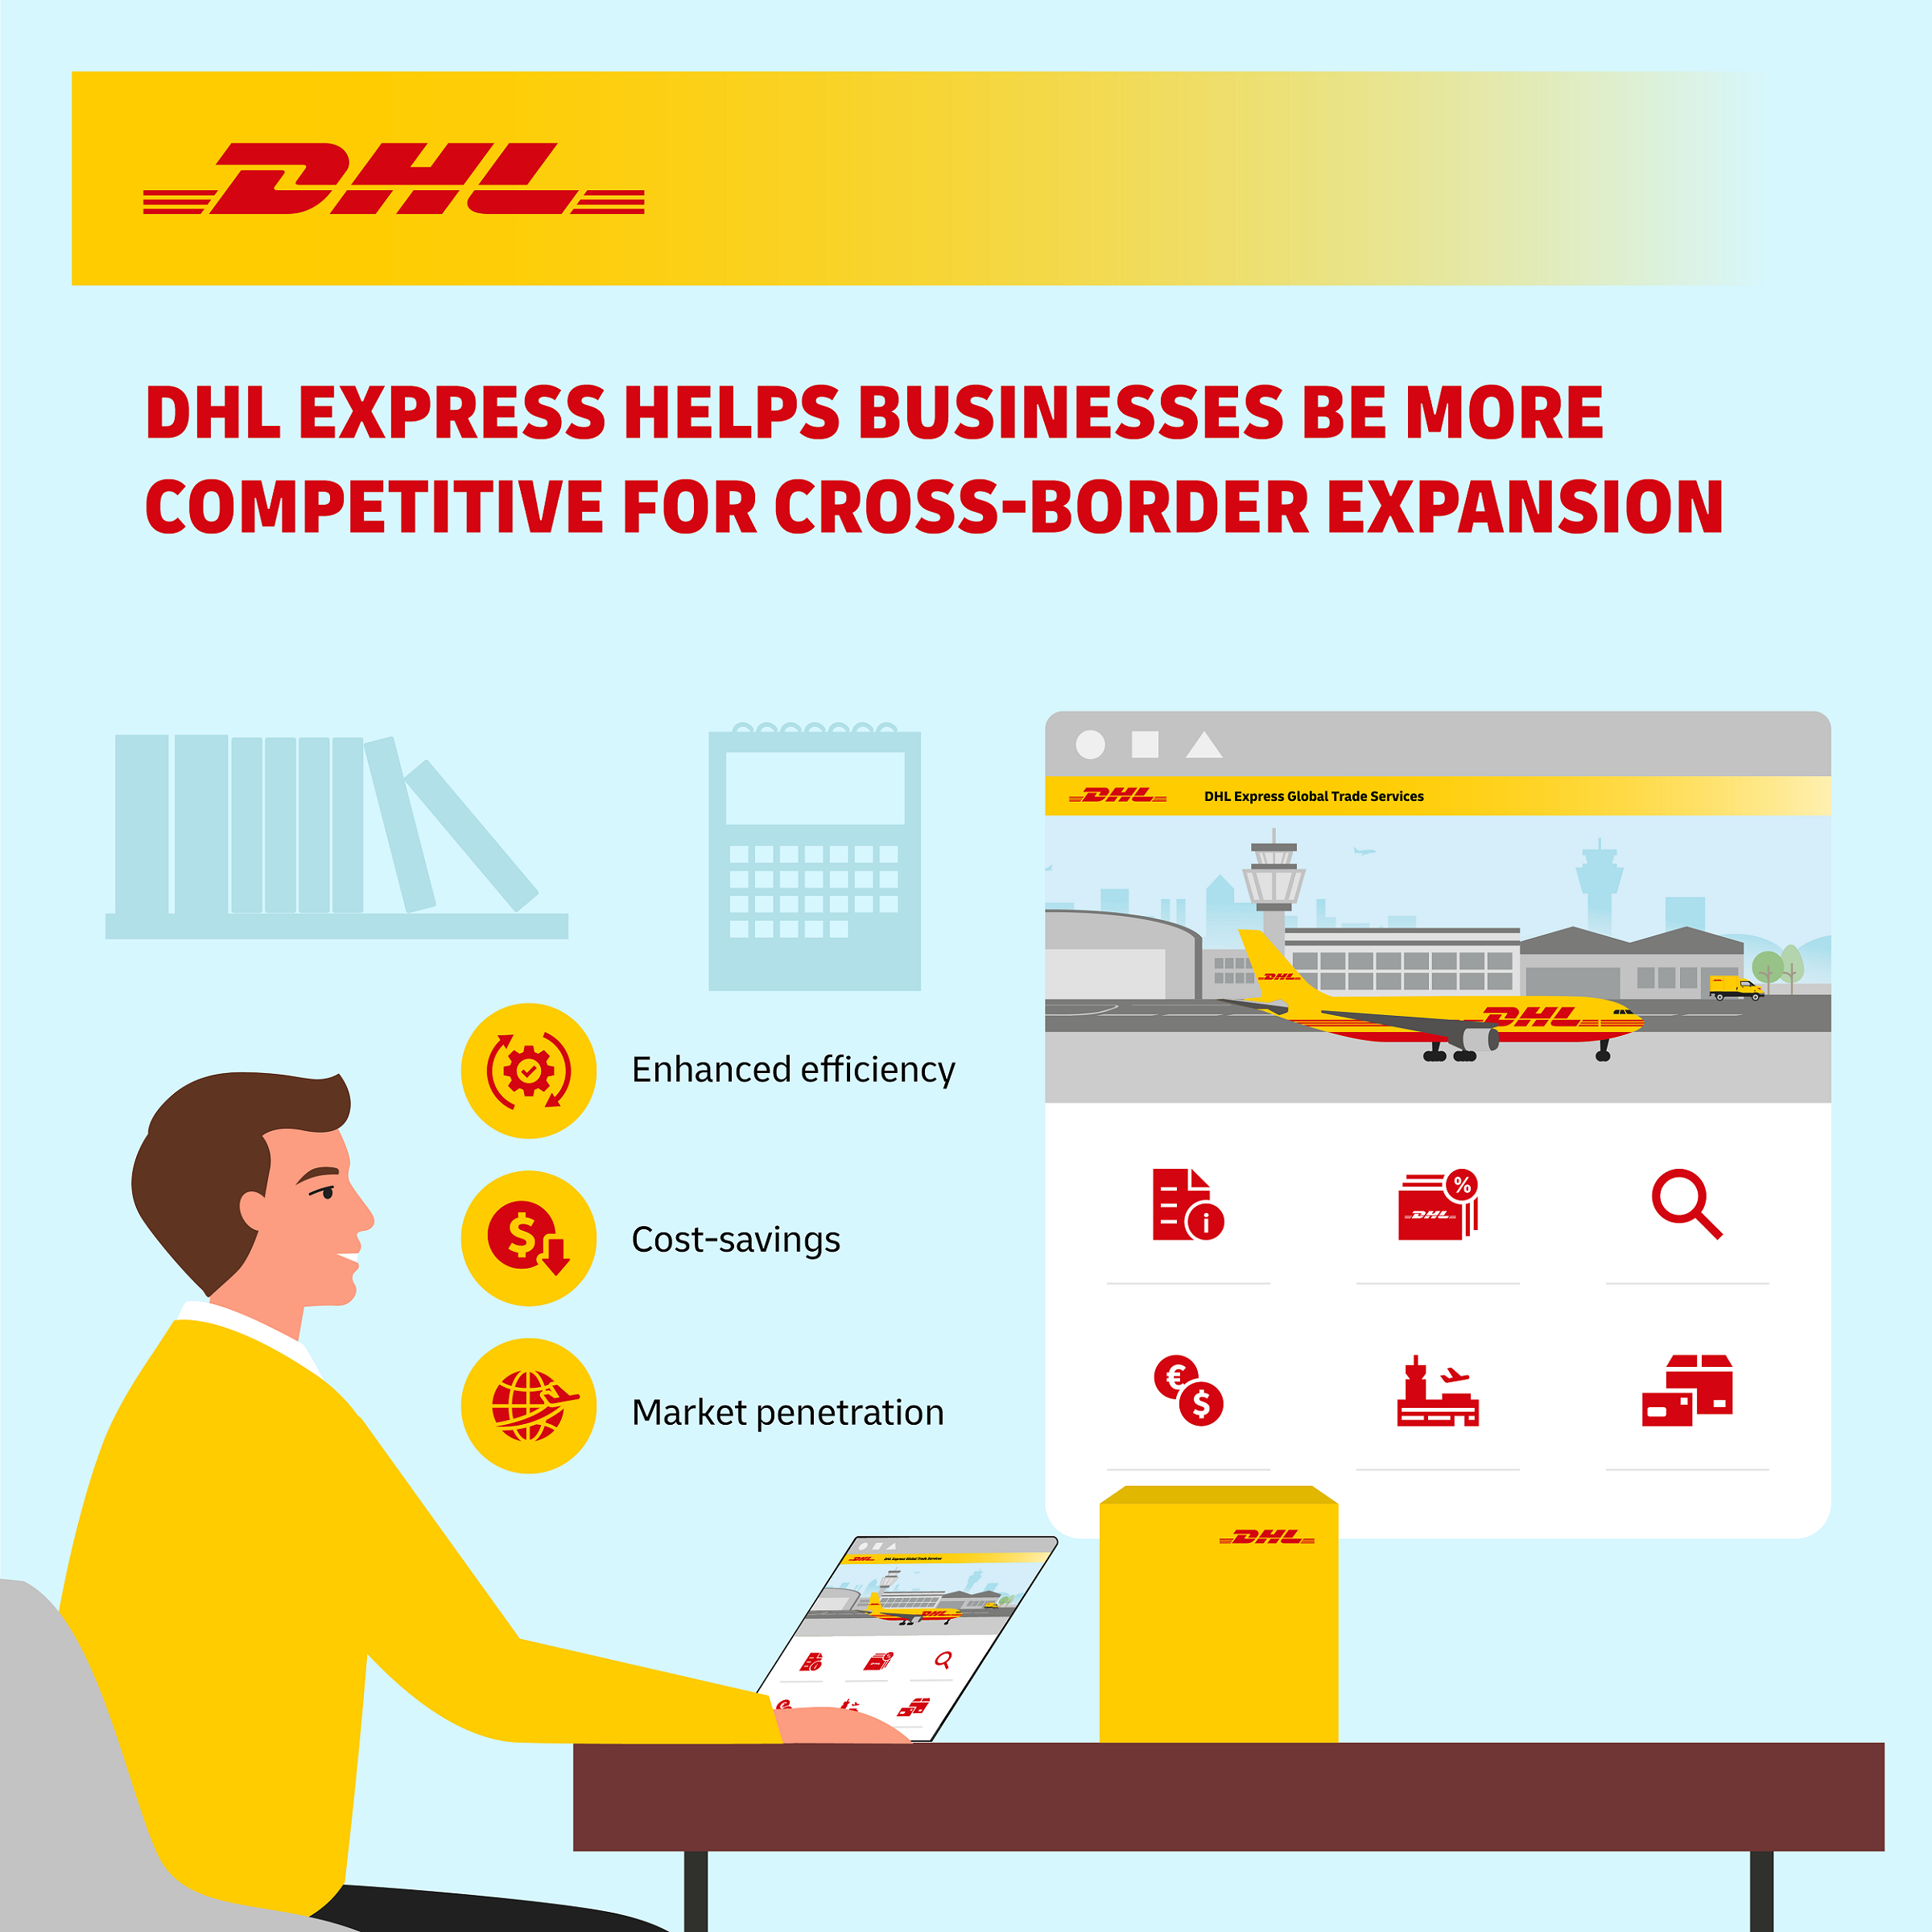 DHL Express helps businesses be more competitive for cross-border expansion